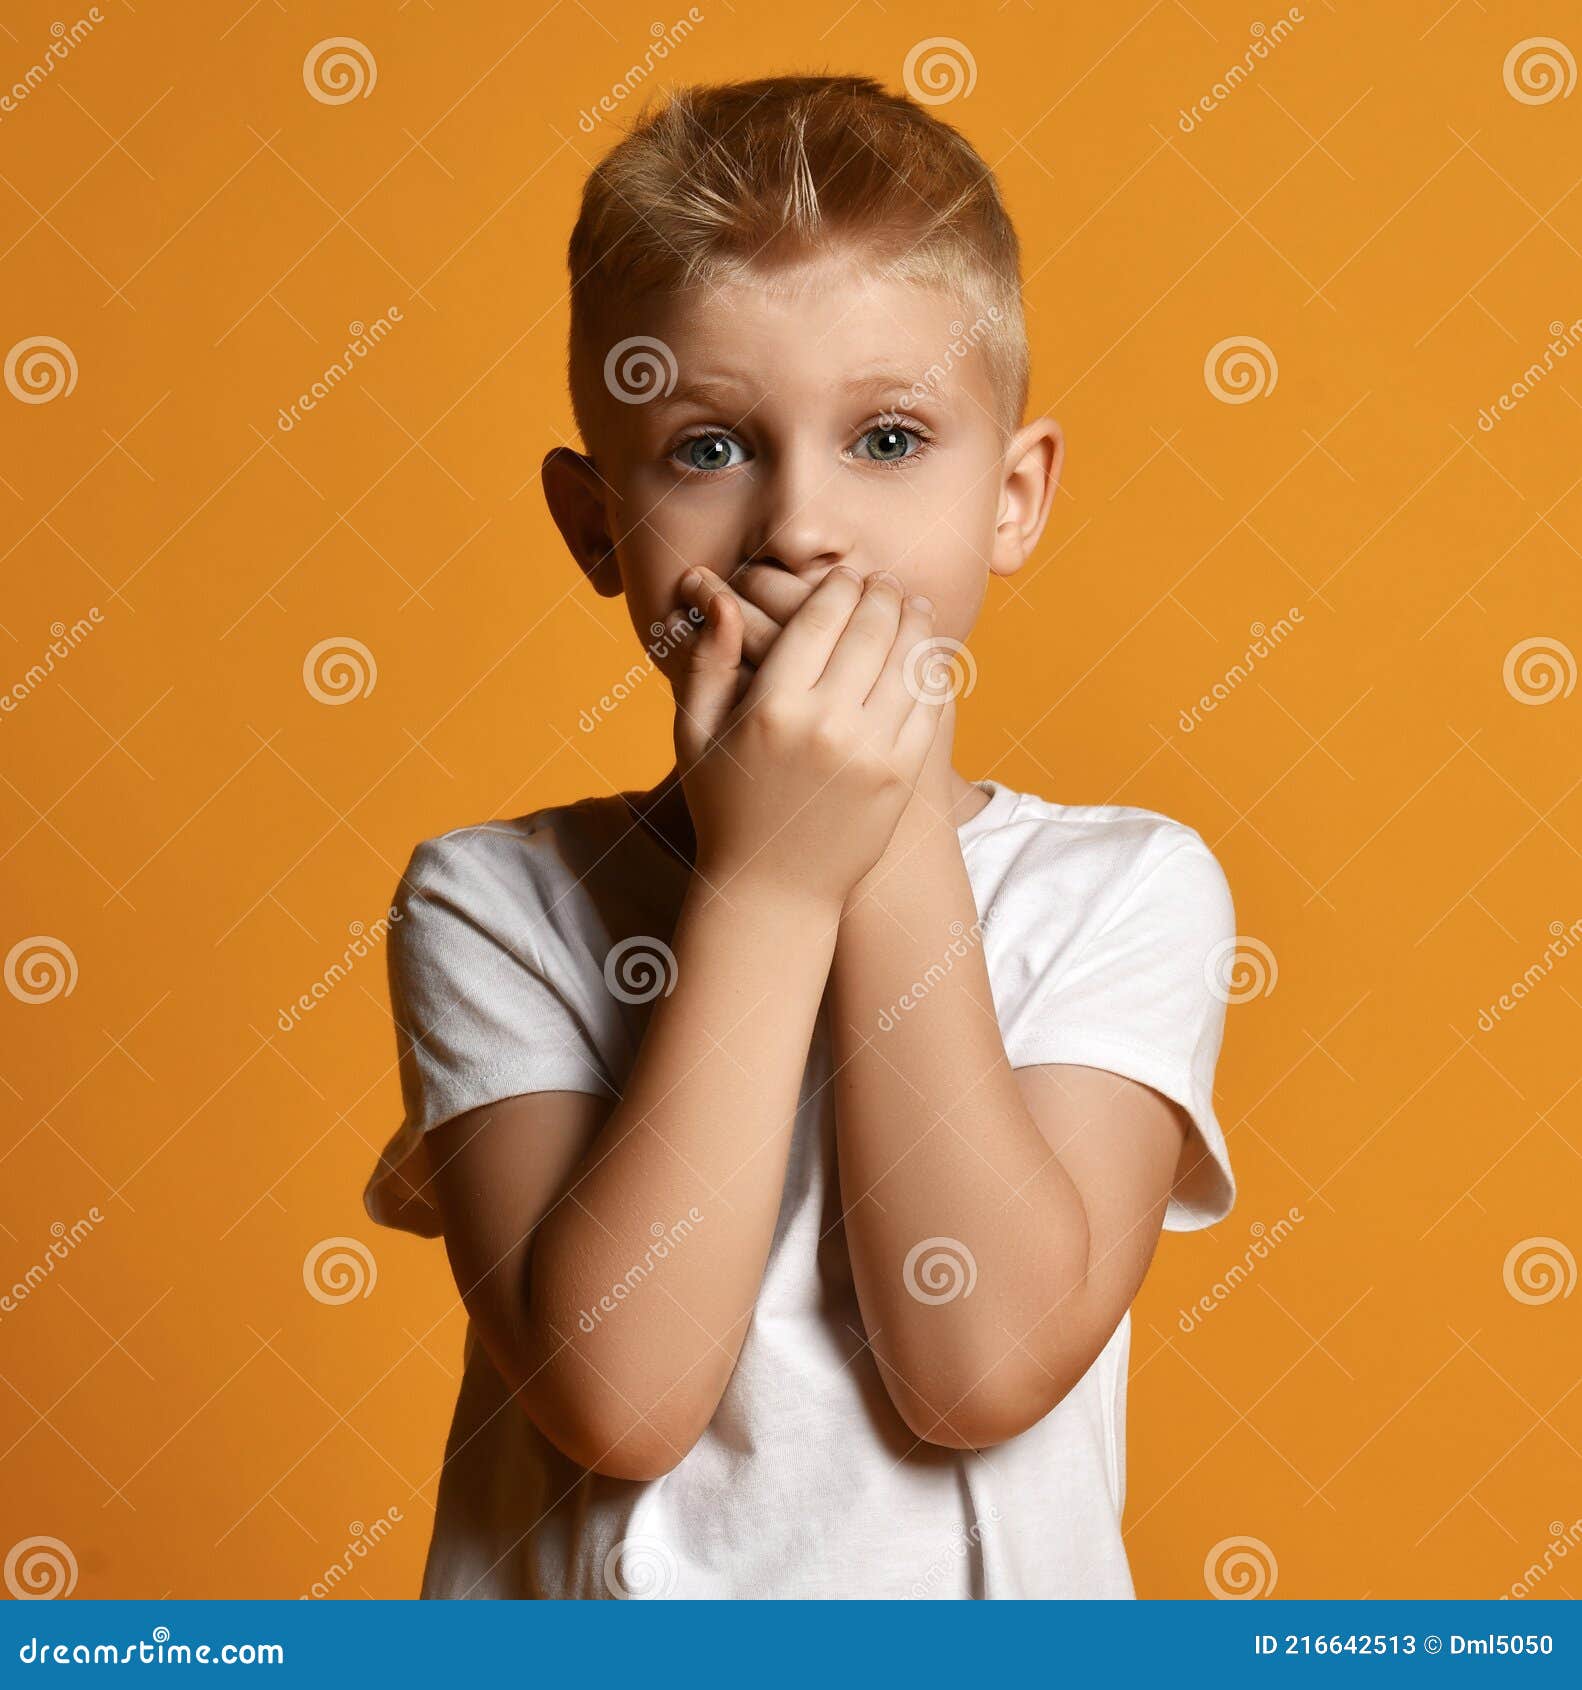 young school boy kid in white t-shirt stands scared, eyes wide opened in surprise, covering his mouth with both hands